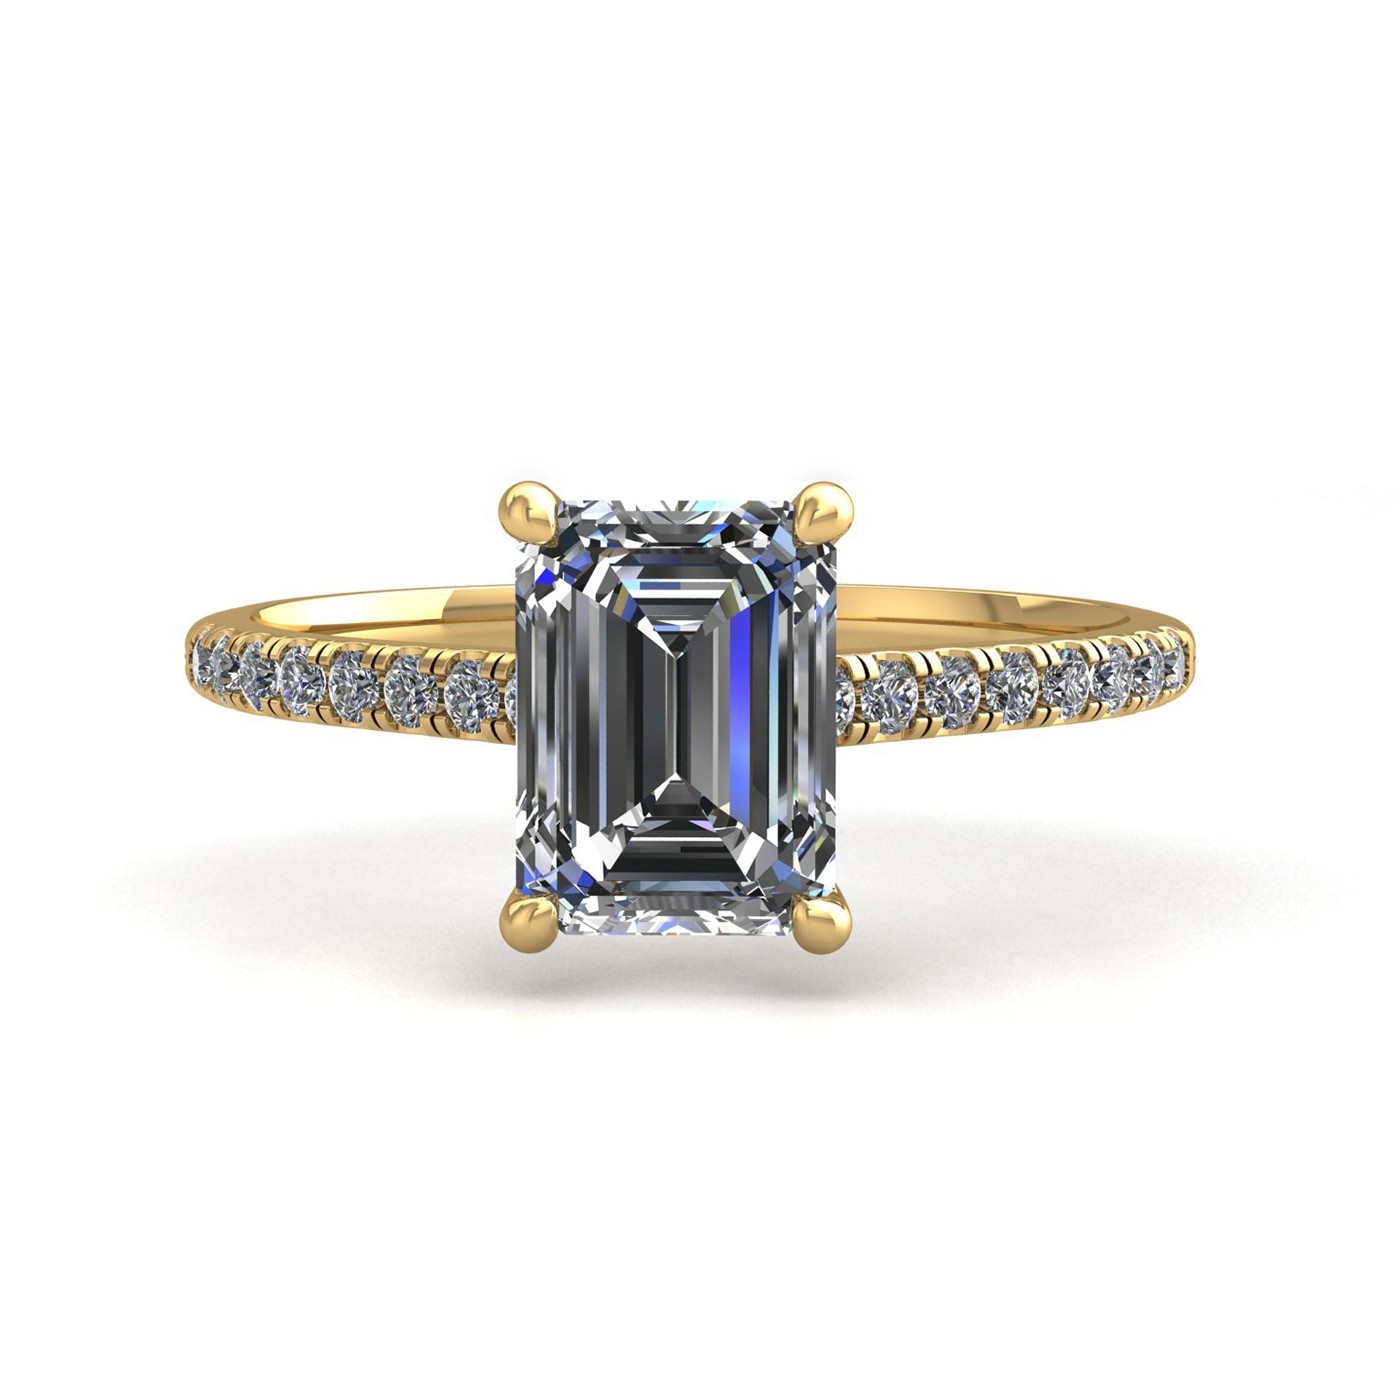 18k yellow gold 1.2ct 4 prongs emerald cut diamond engagement ring with whisper thin pavÉ set band